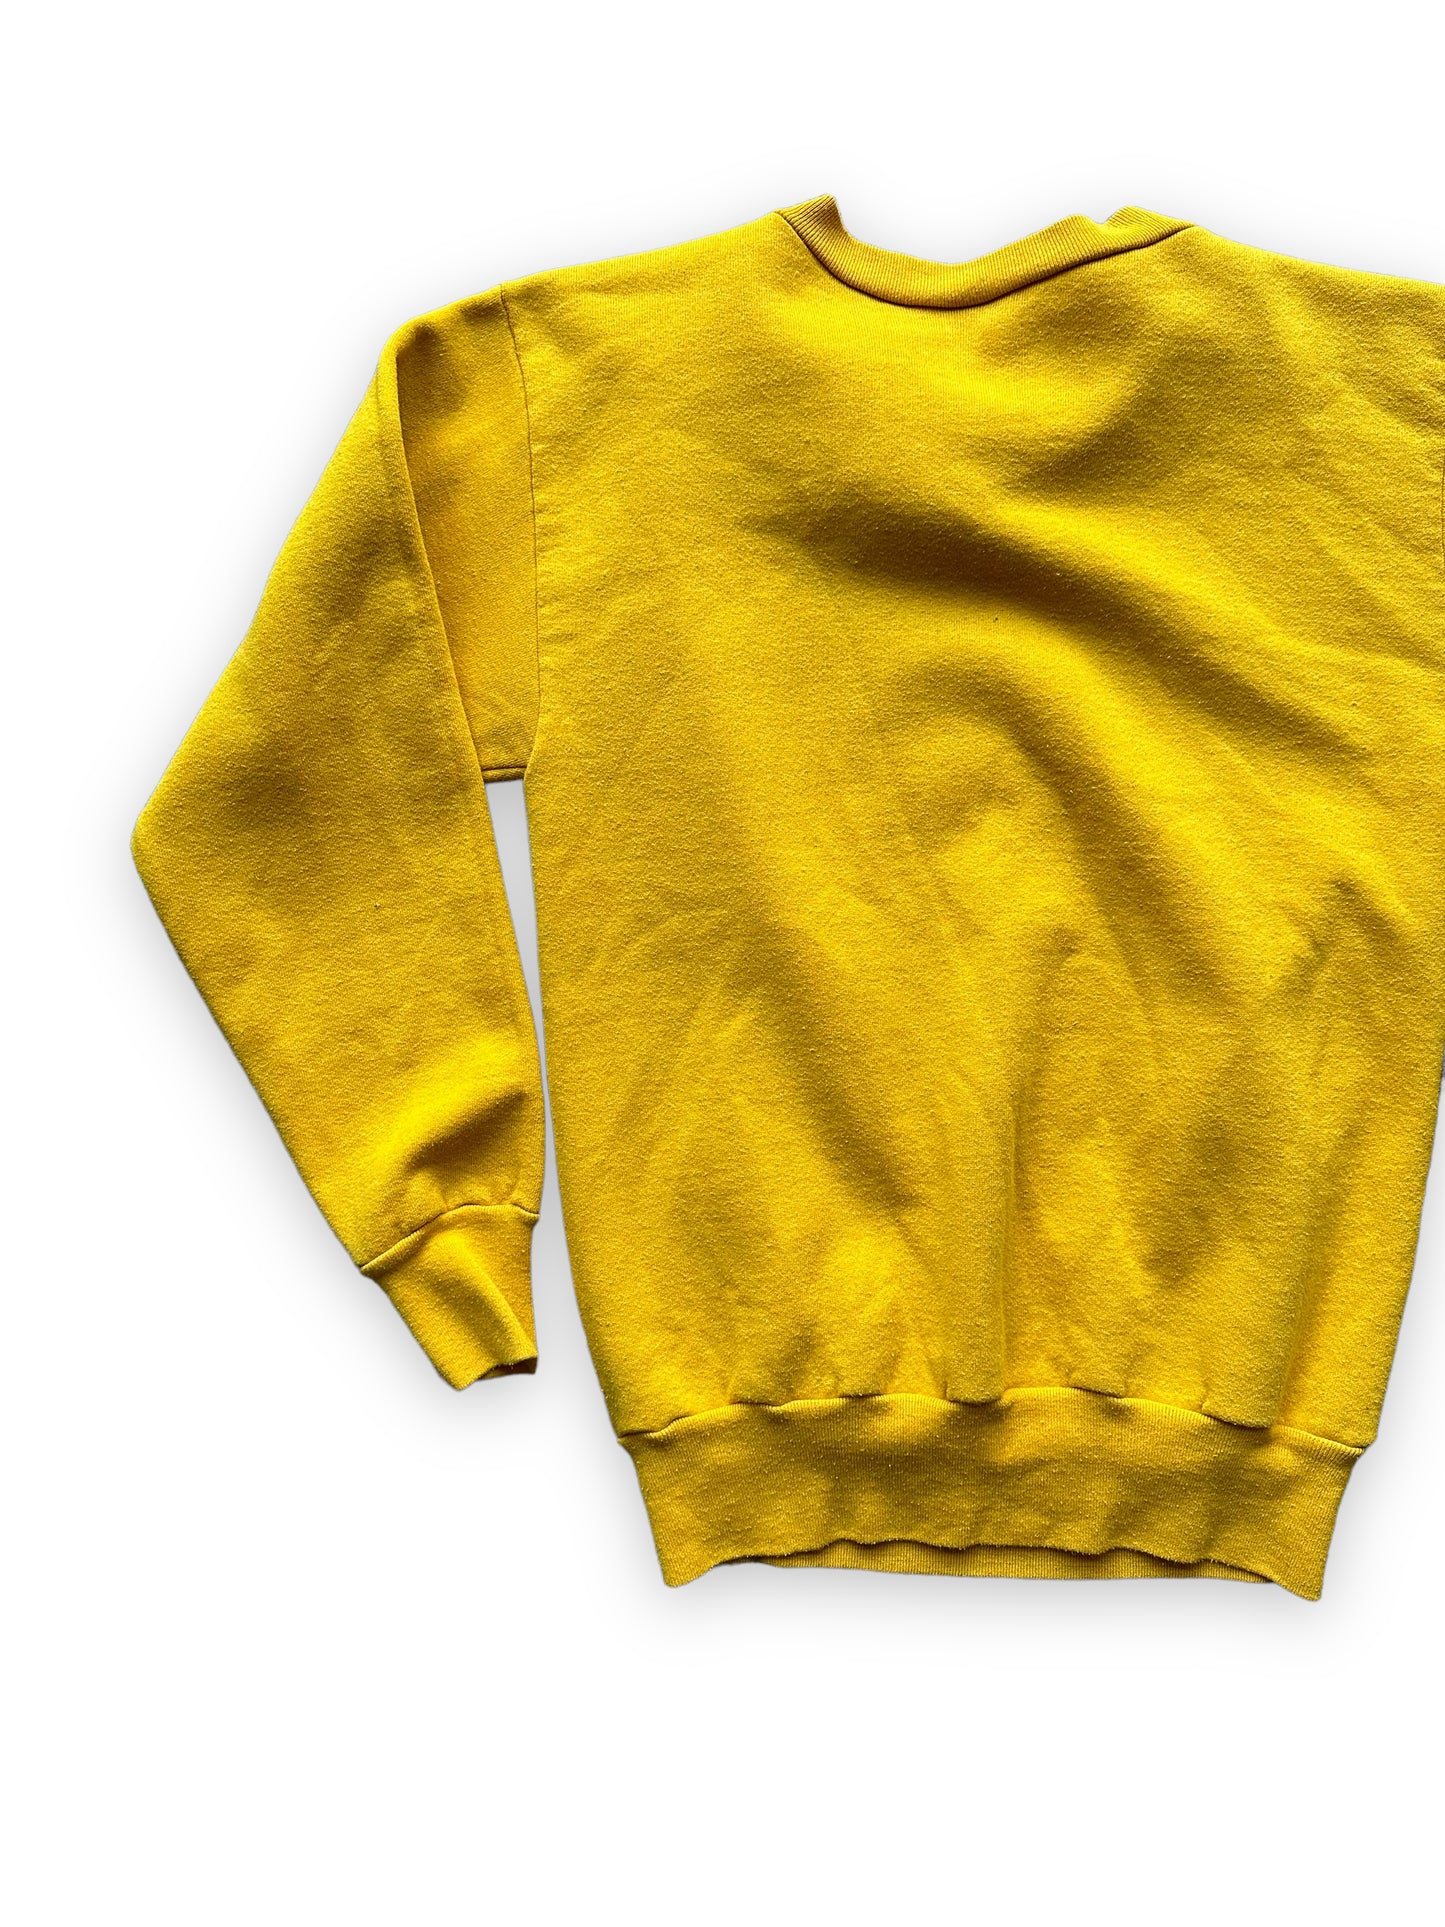 Left Rear View of Vintage Yellow Wyoming Crewneck Sweatshirt SZ M | Vintage Crewneck Sweatshirt Seattle | Barn Owl Vintage Seattle